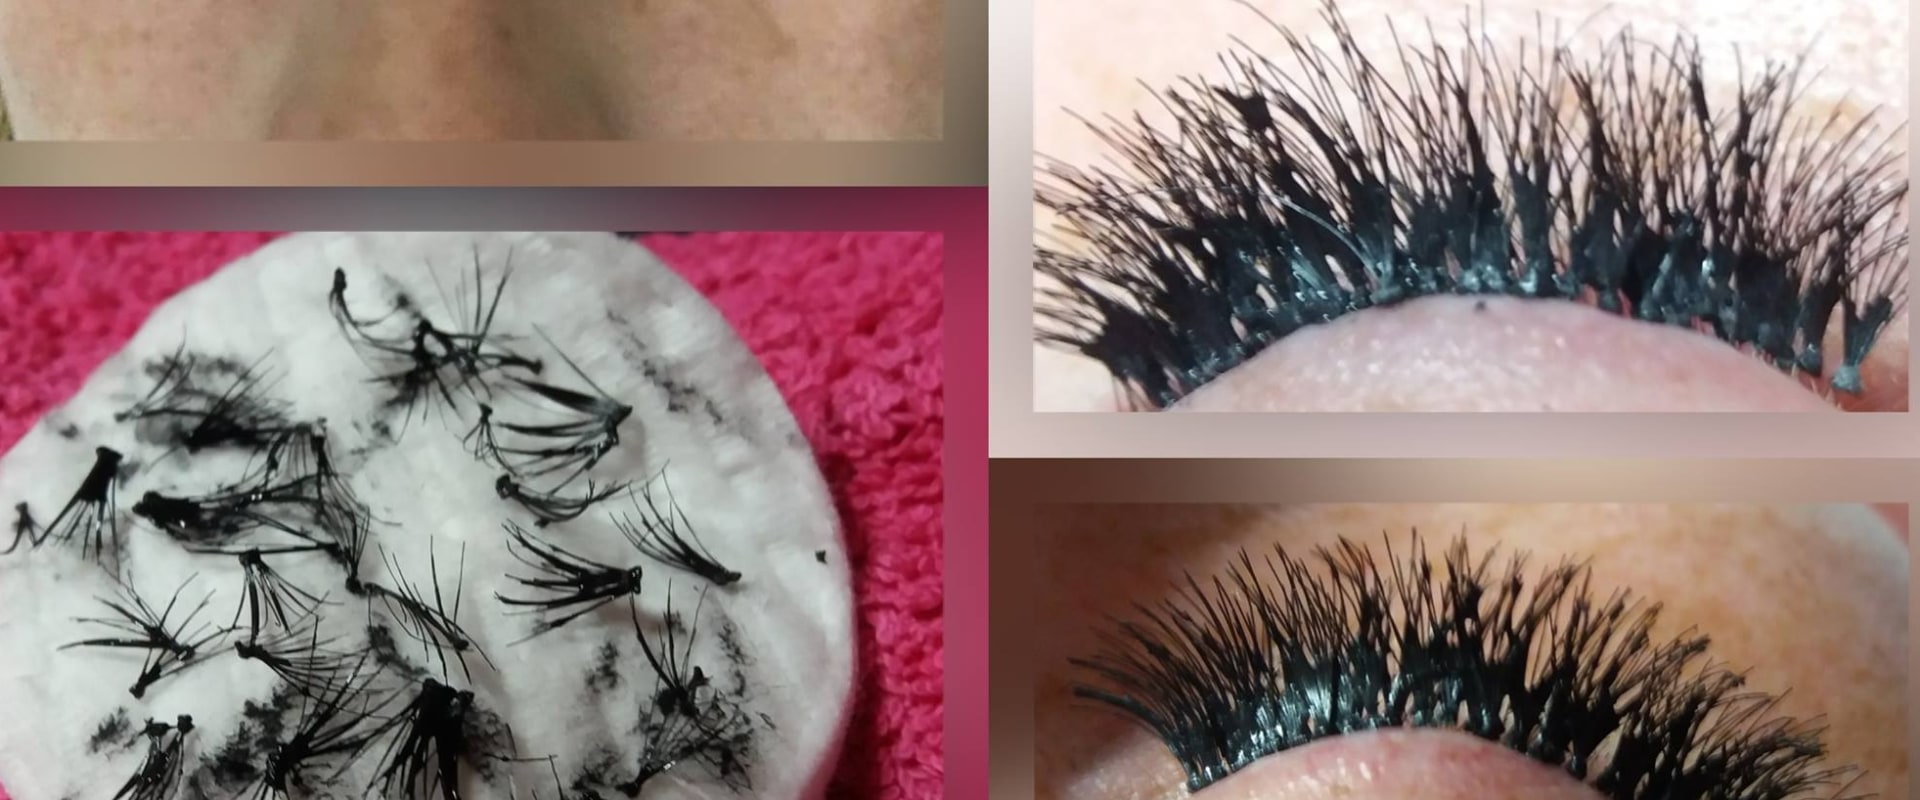 How do you know if your lash tech is good?